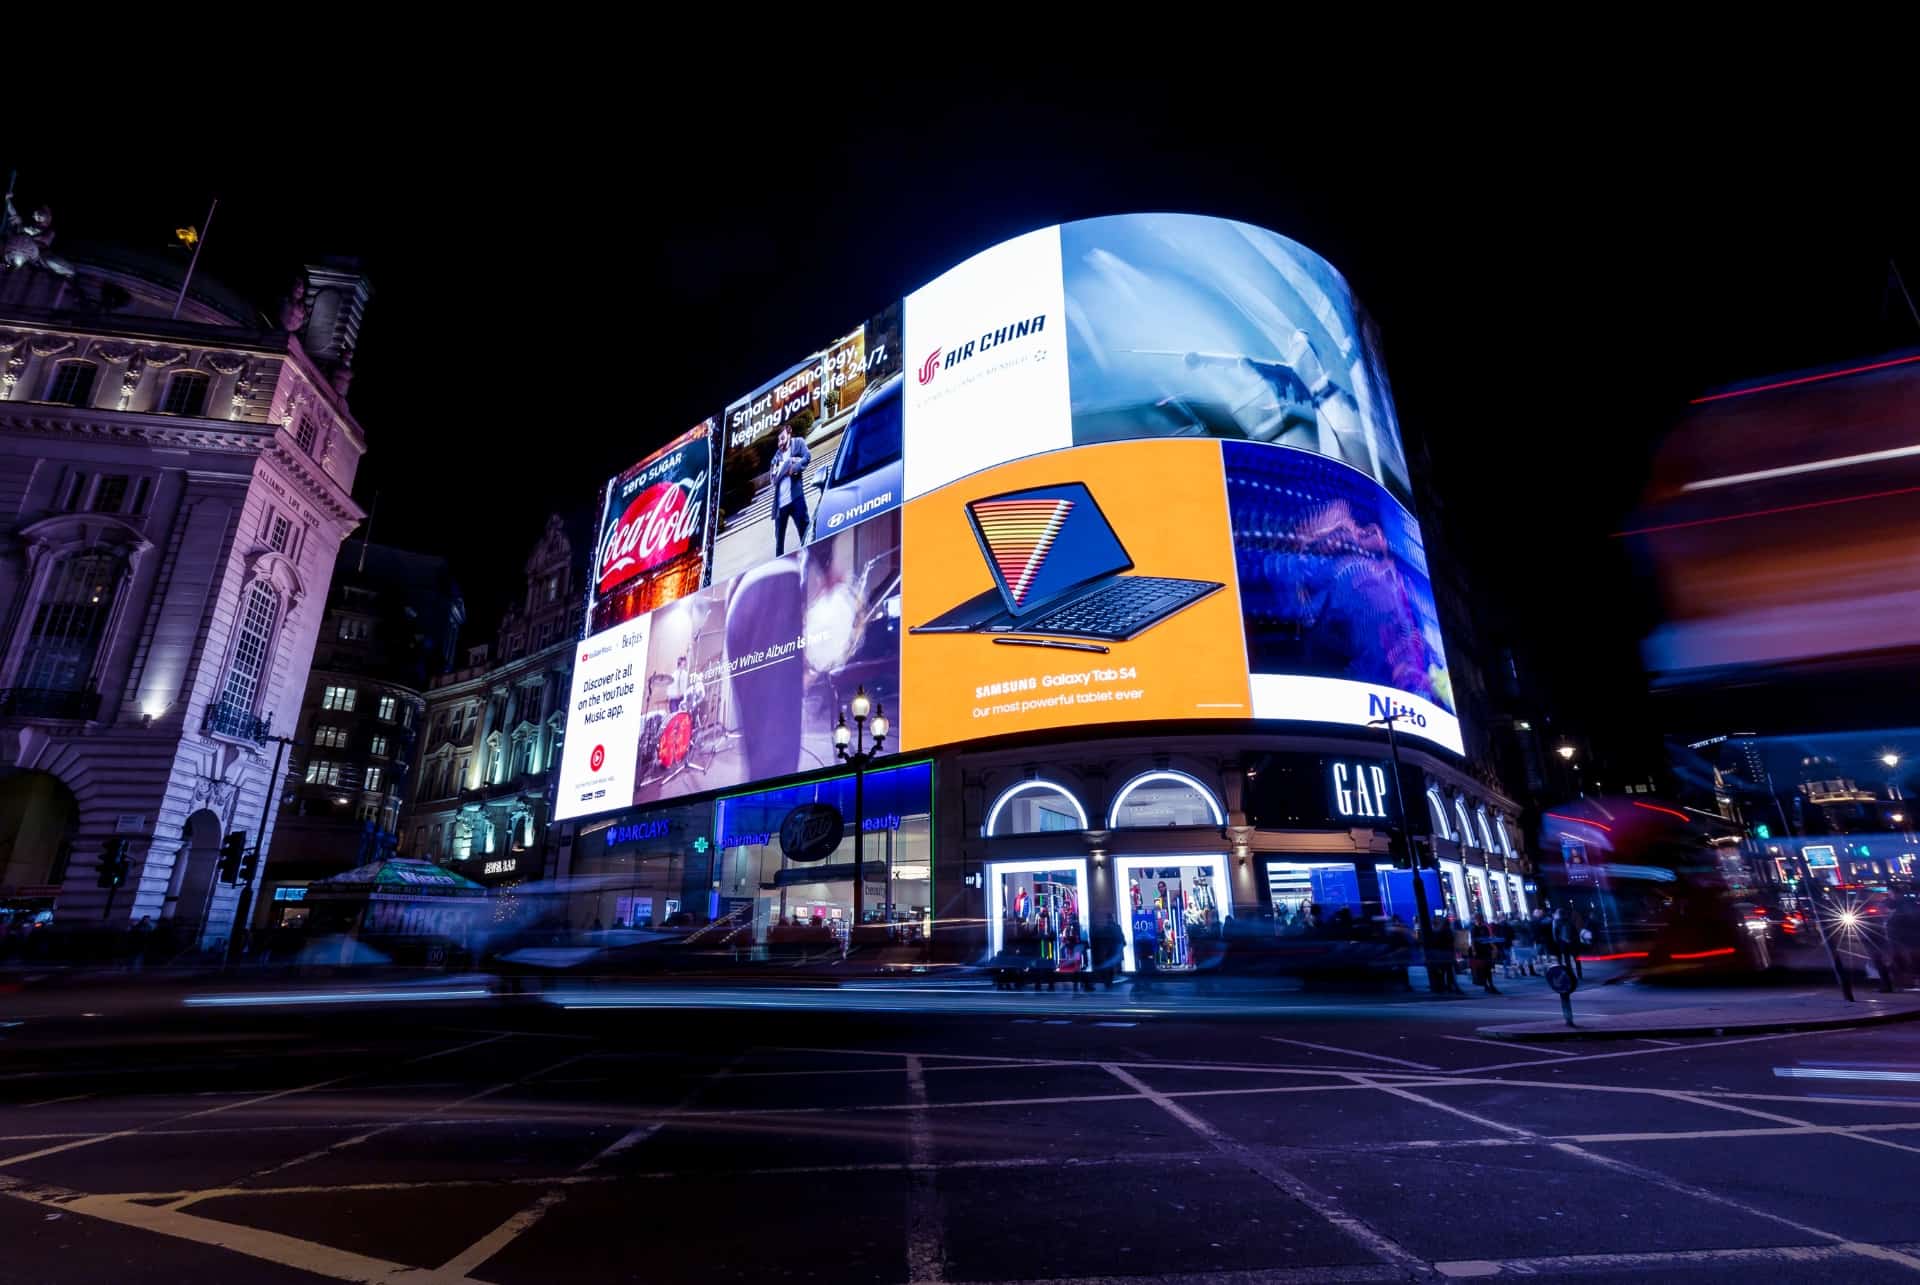 piccadilly circus visiter londres 5 jours